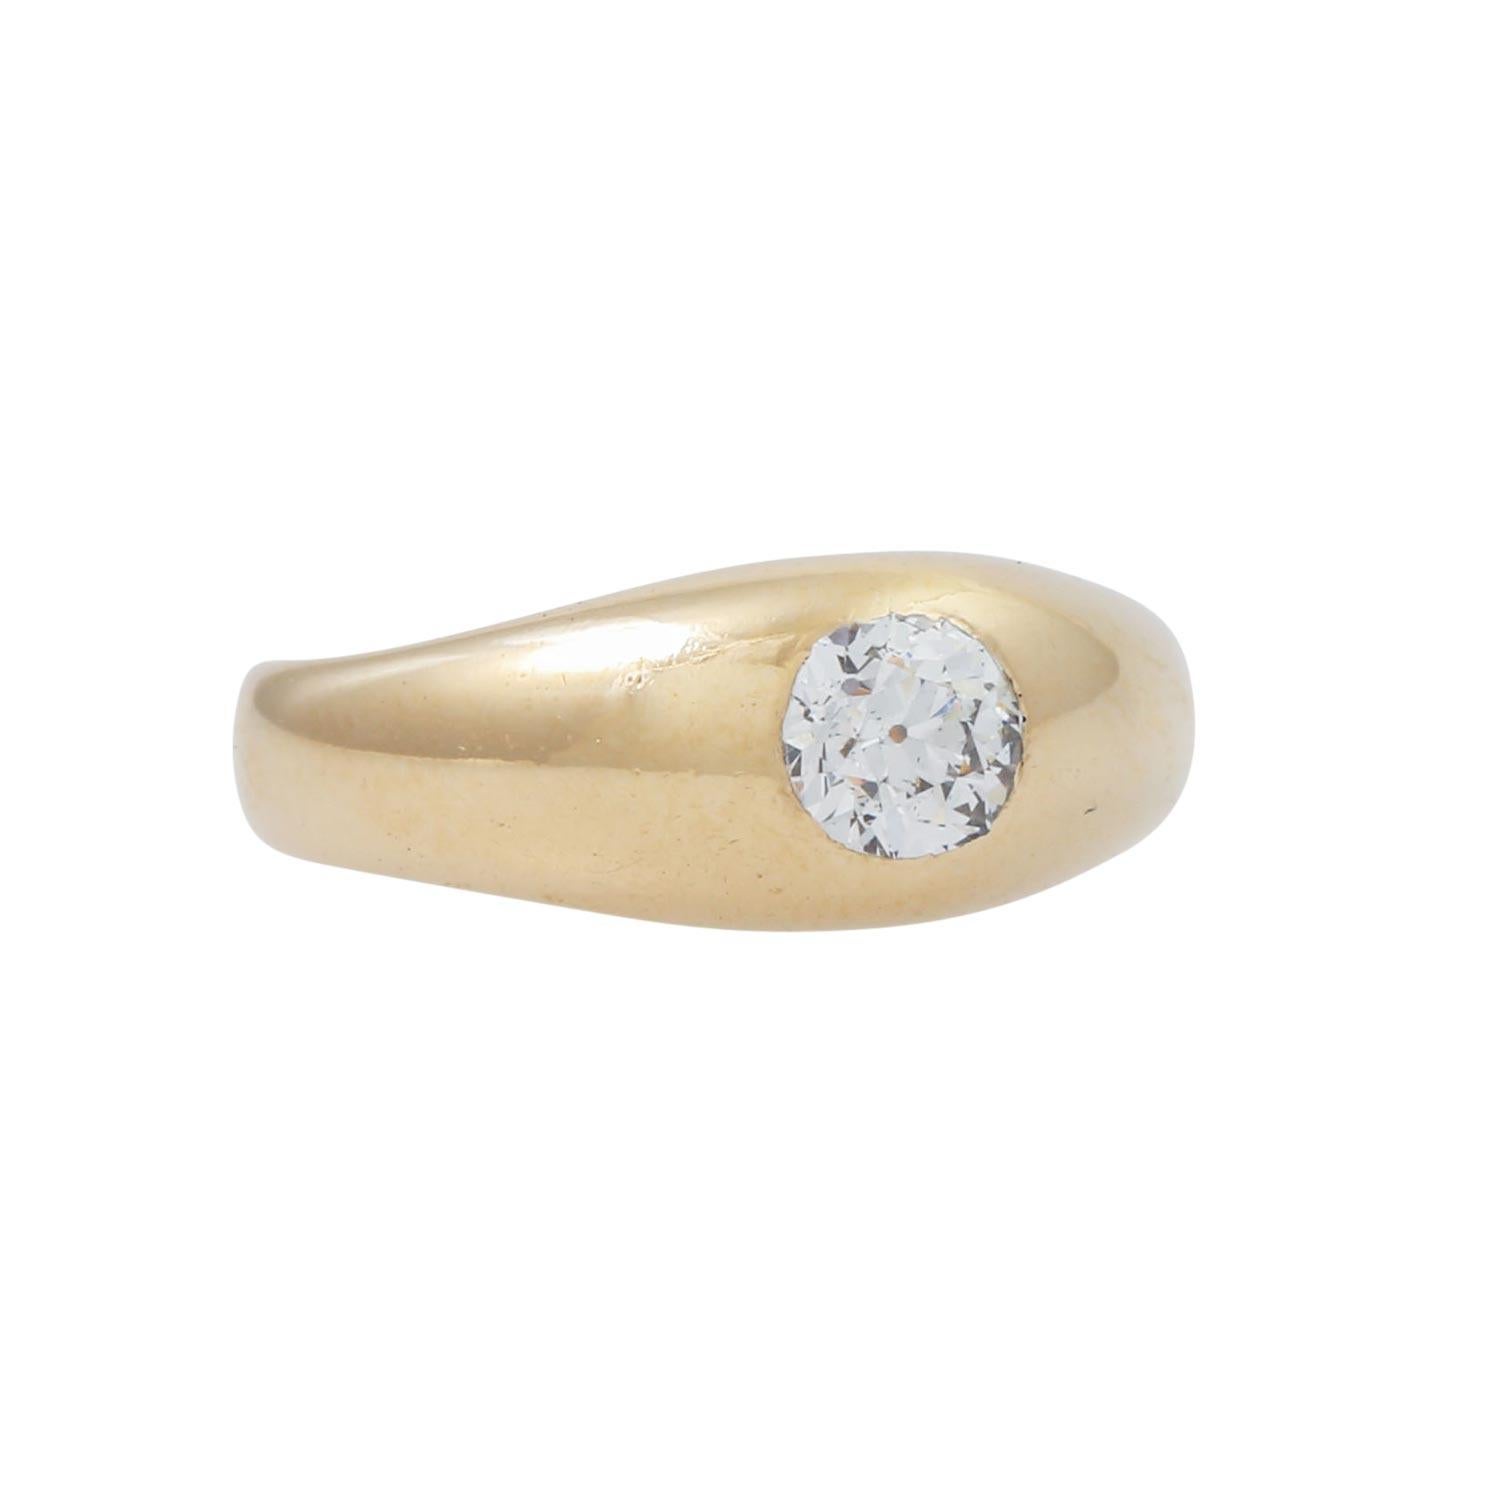 approx. GW (K)/SI1, GG 14K, 5.4 g, RW: 52/12, 1st half of the 20th century, signs of wear, facet edges slightly rubbed.

 Ring with old-European-cut diamond approx. 0.5 ct, approx. TIW (K)/SI1, 14K YG, 5.4 gr, ring size 52/12, 1st half 20th century,